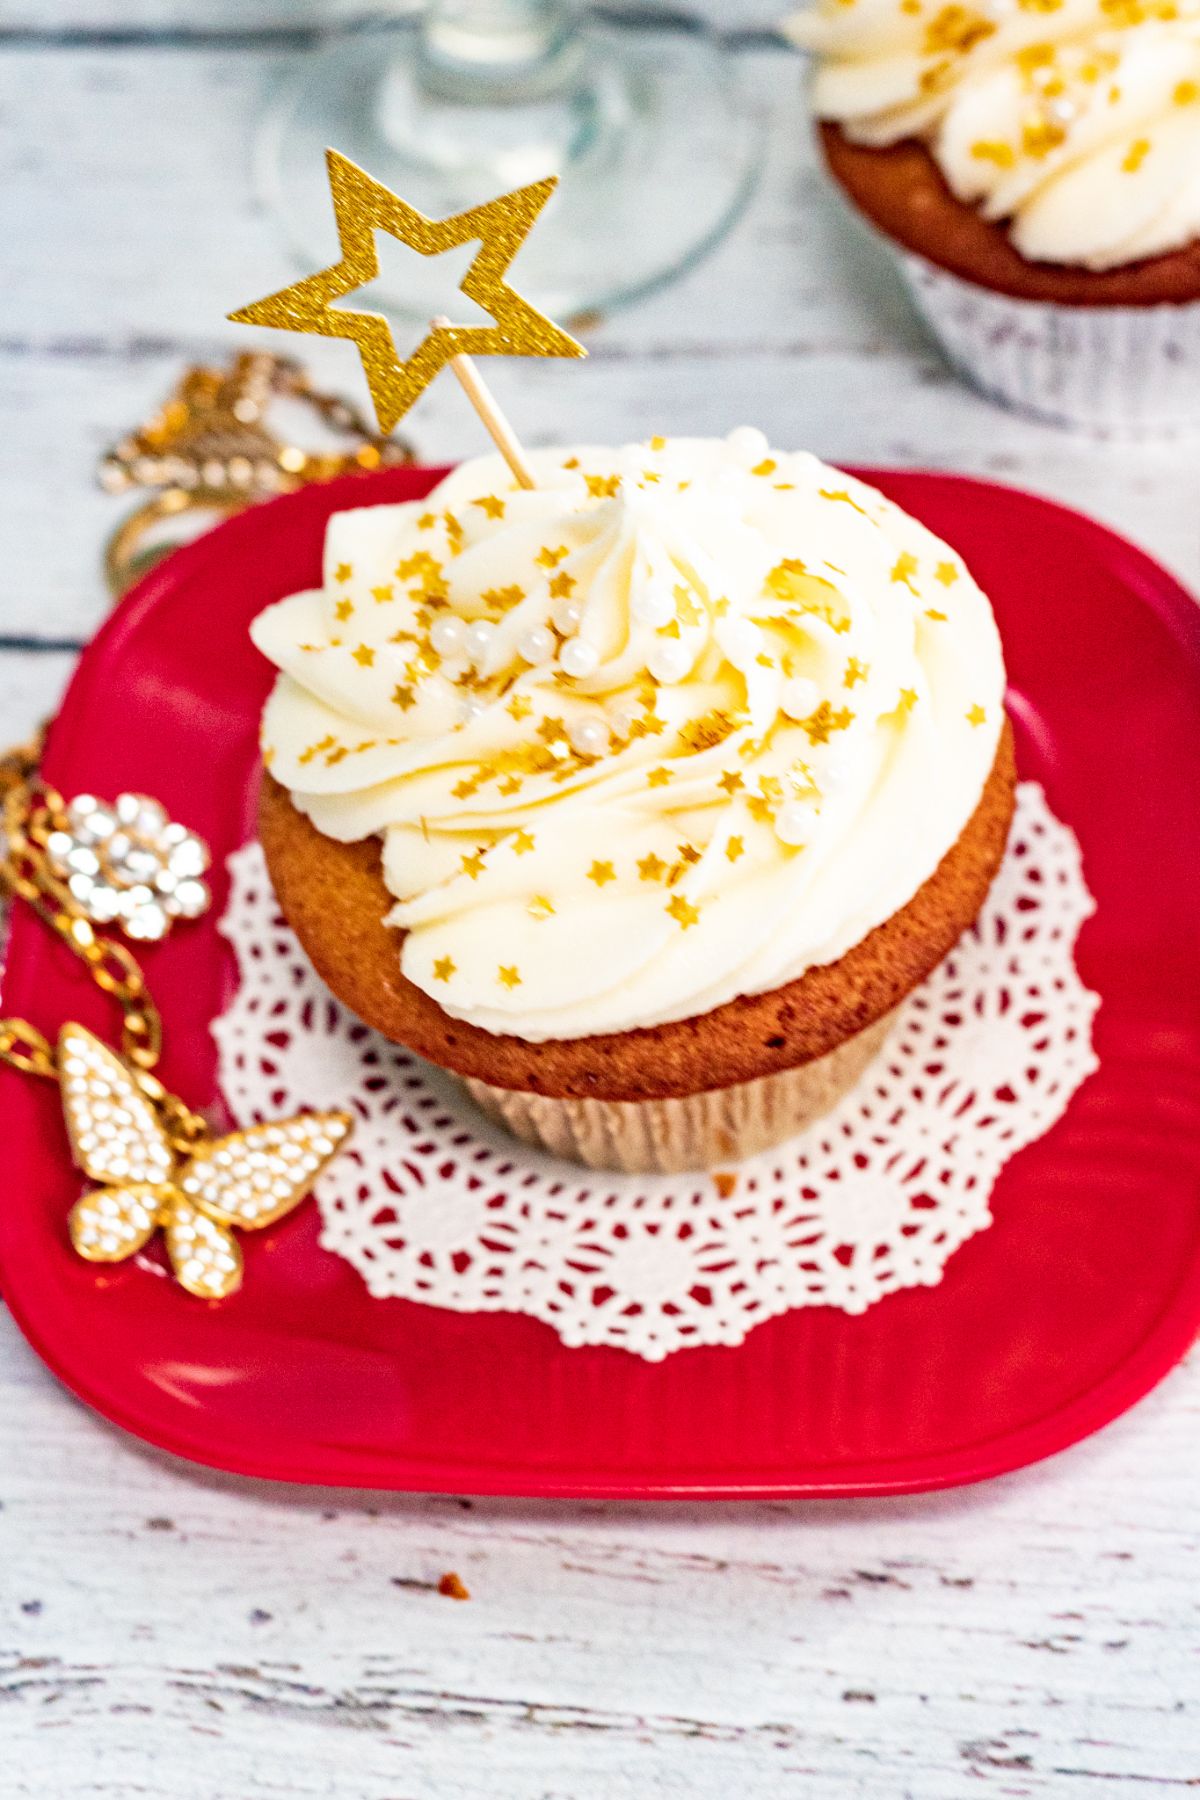 A Champagne Cupcake on a red decorated plate.